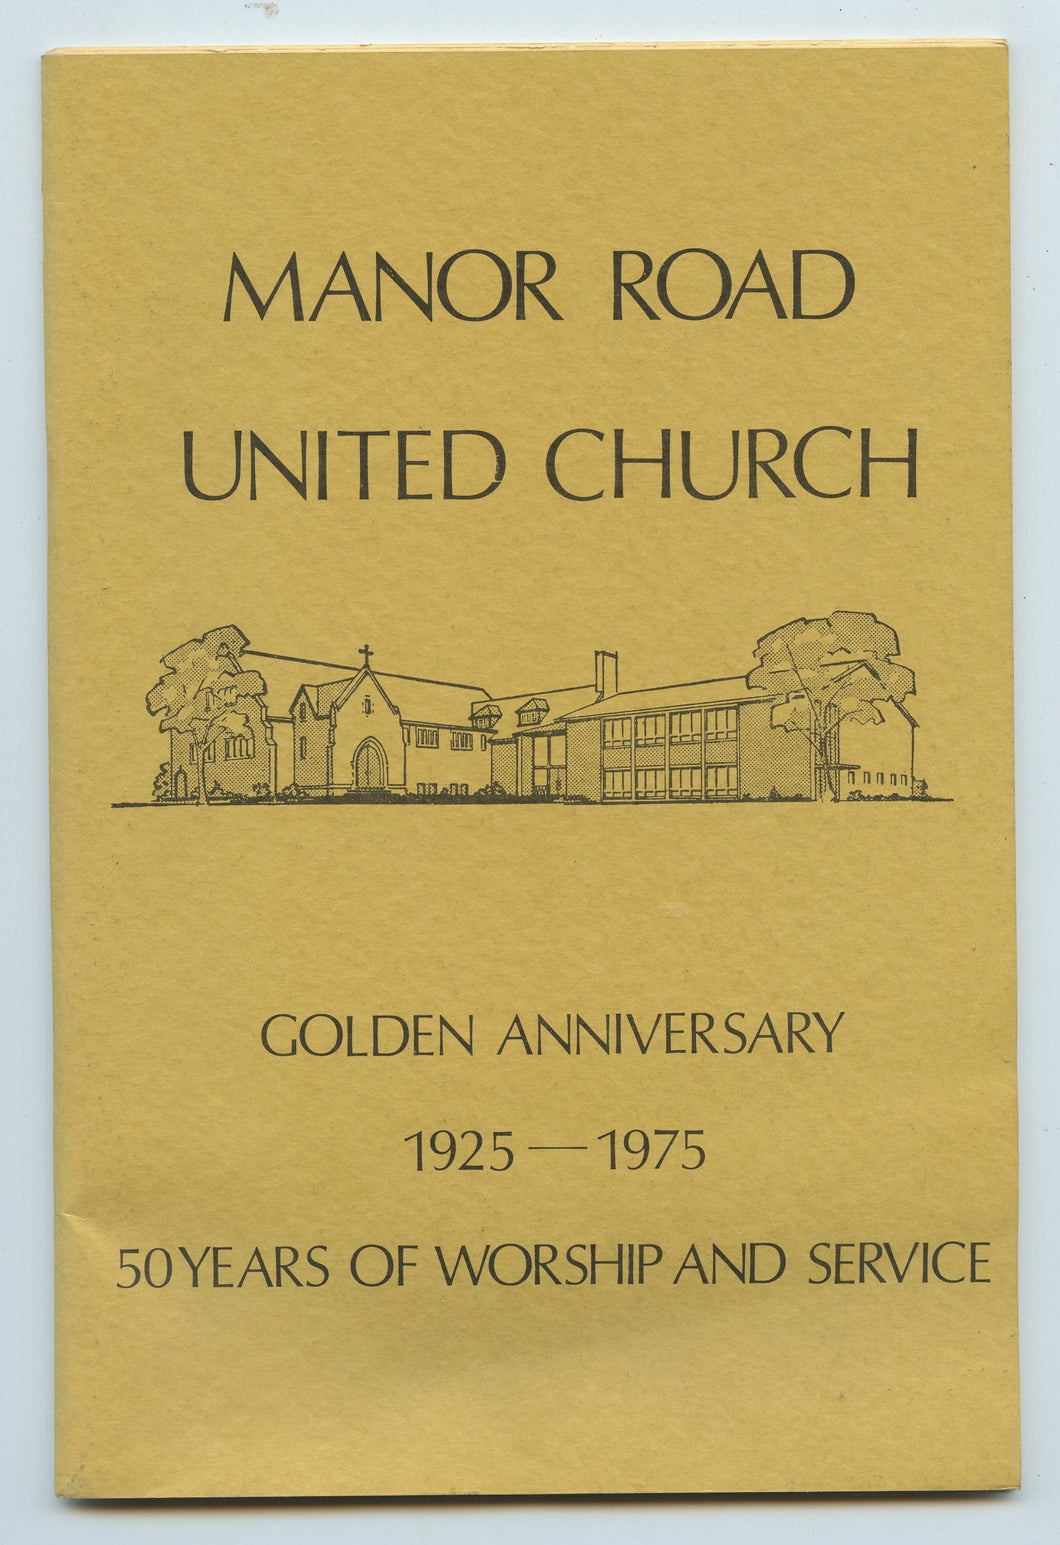 Manor Road United Church Golden Anniversary 1925-1975: 50 Years of Worship and Service